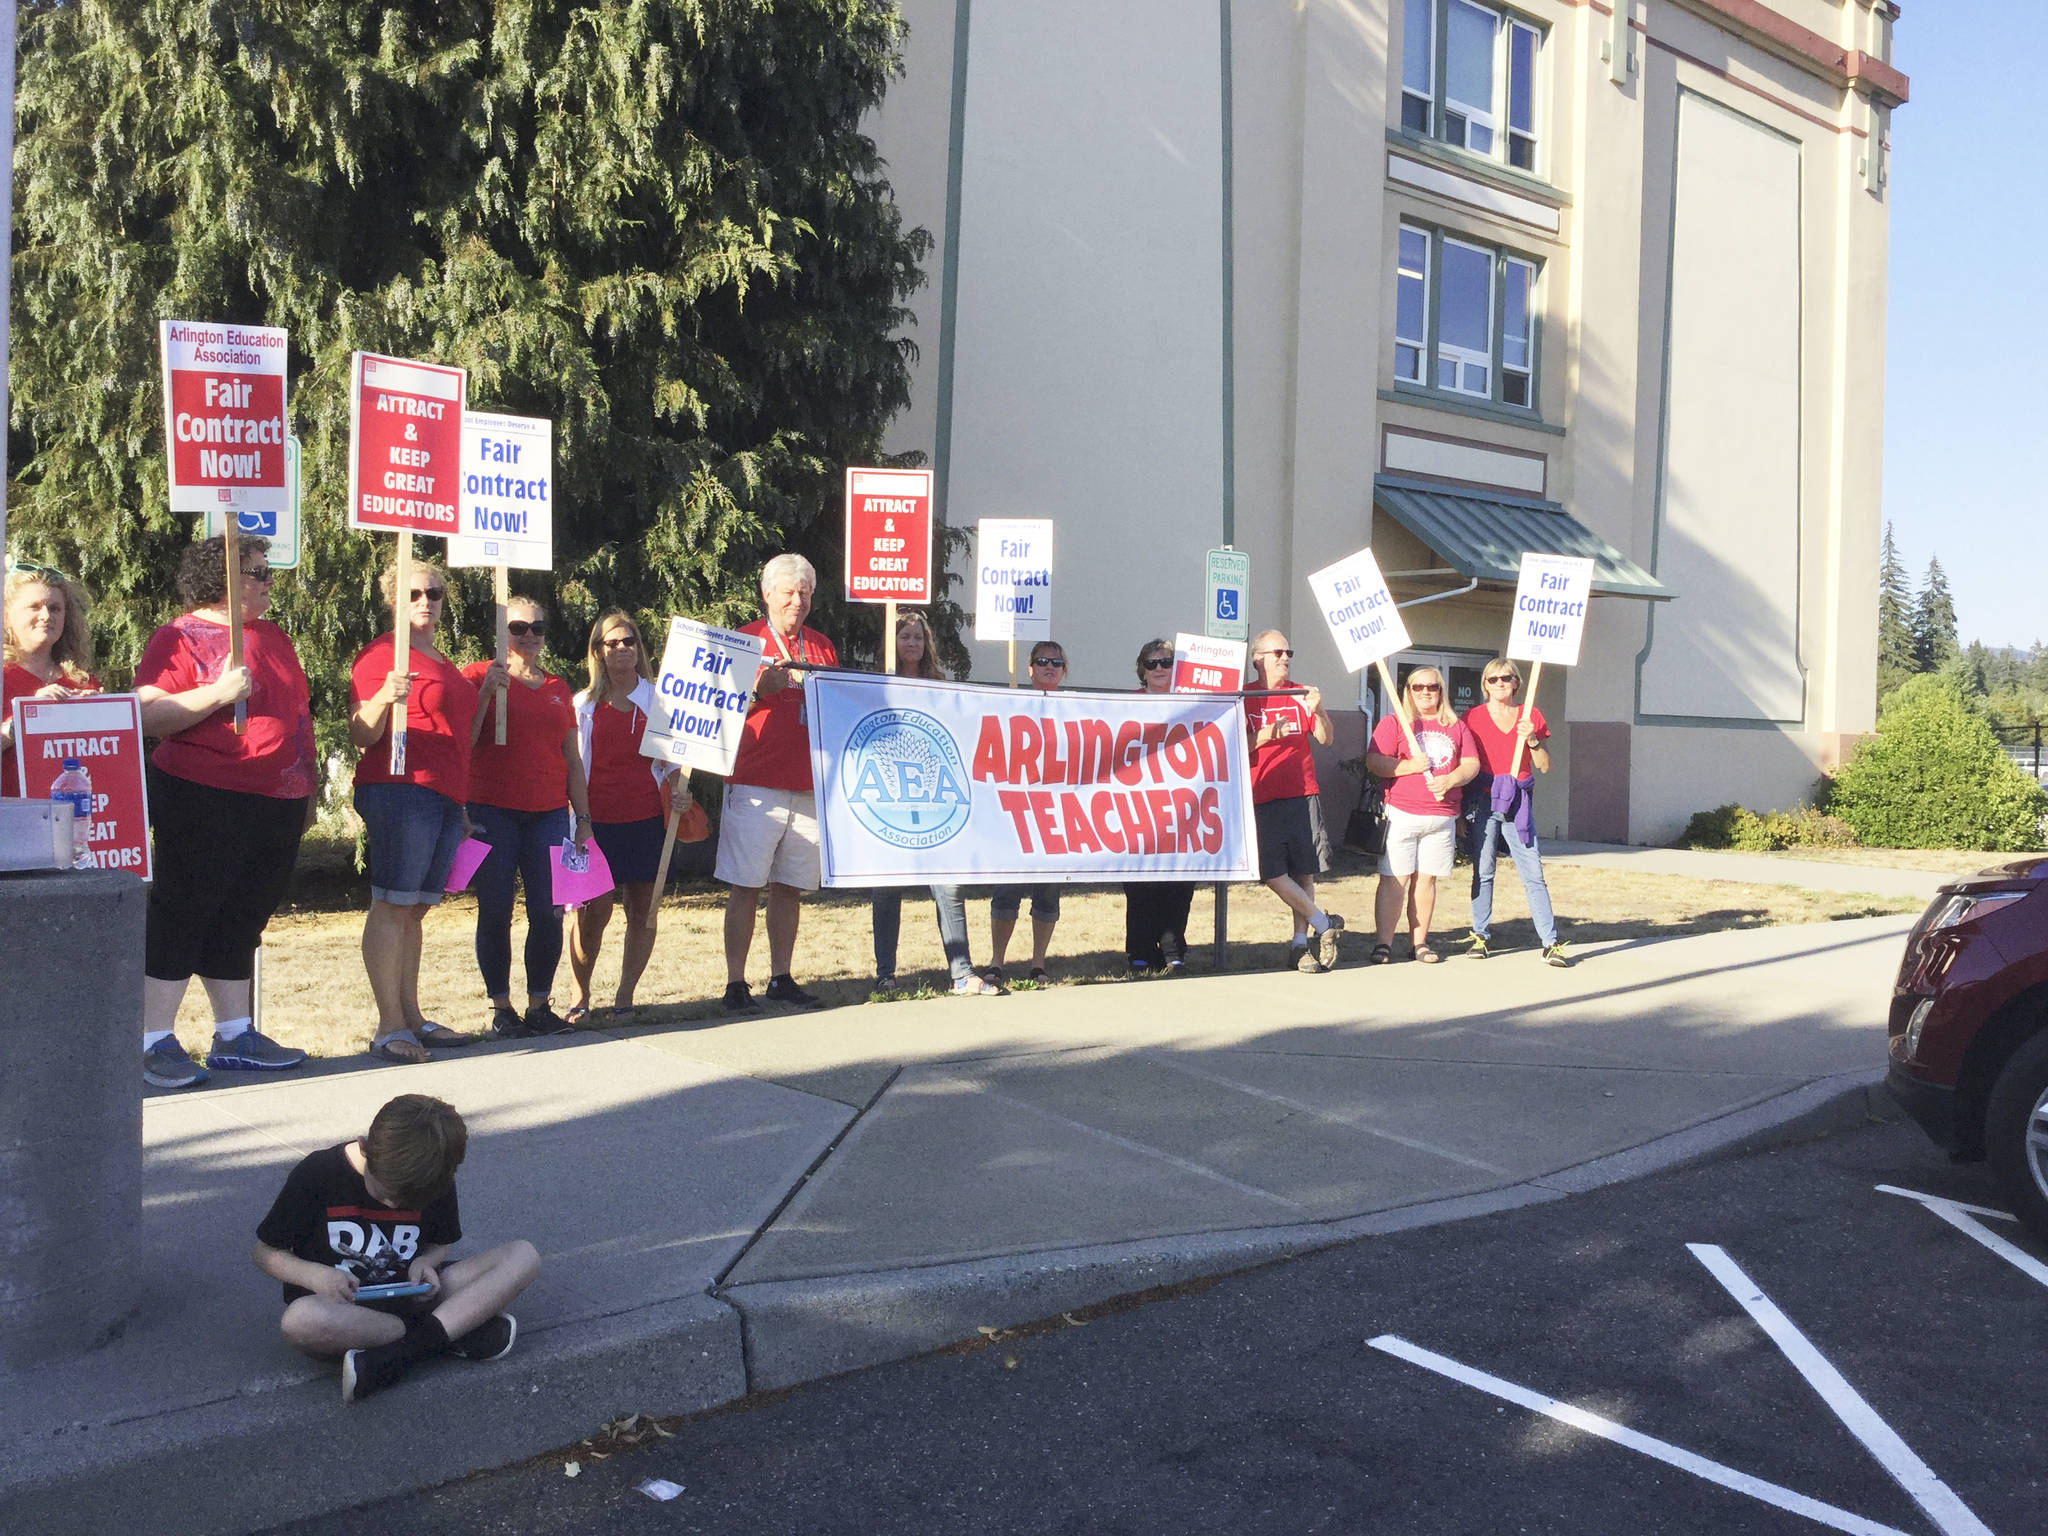 Arlington teachers rallied outside Arlington Public Schools administrative building and school board meeting last week as contract negotiations went down to the wire over Labor Day weekend.